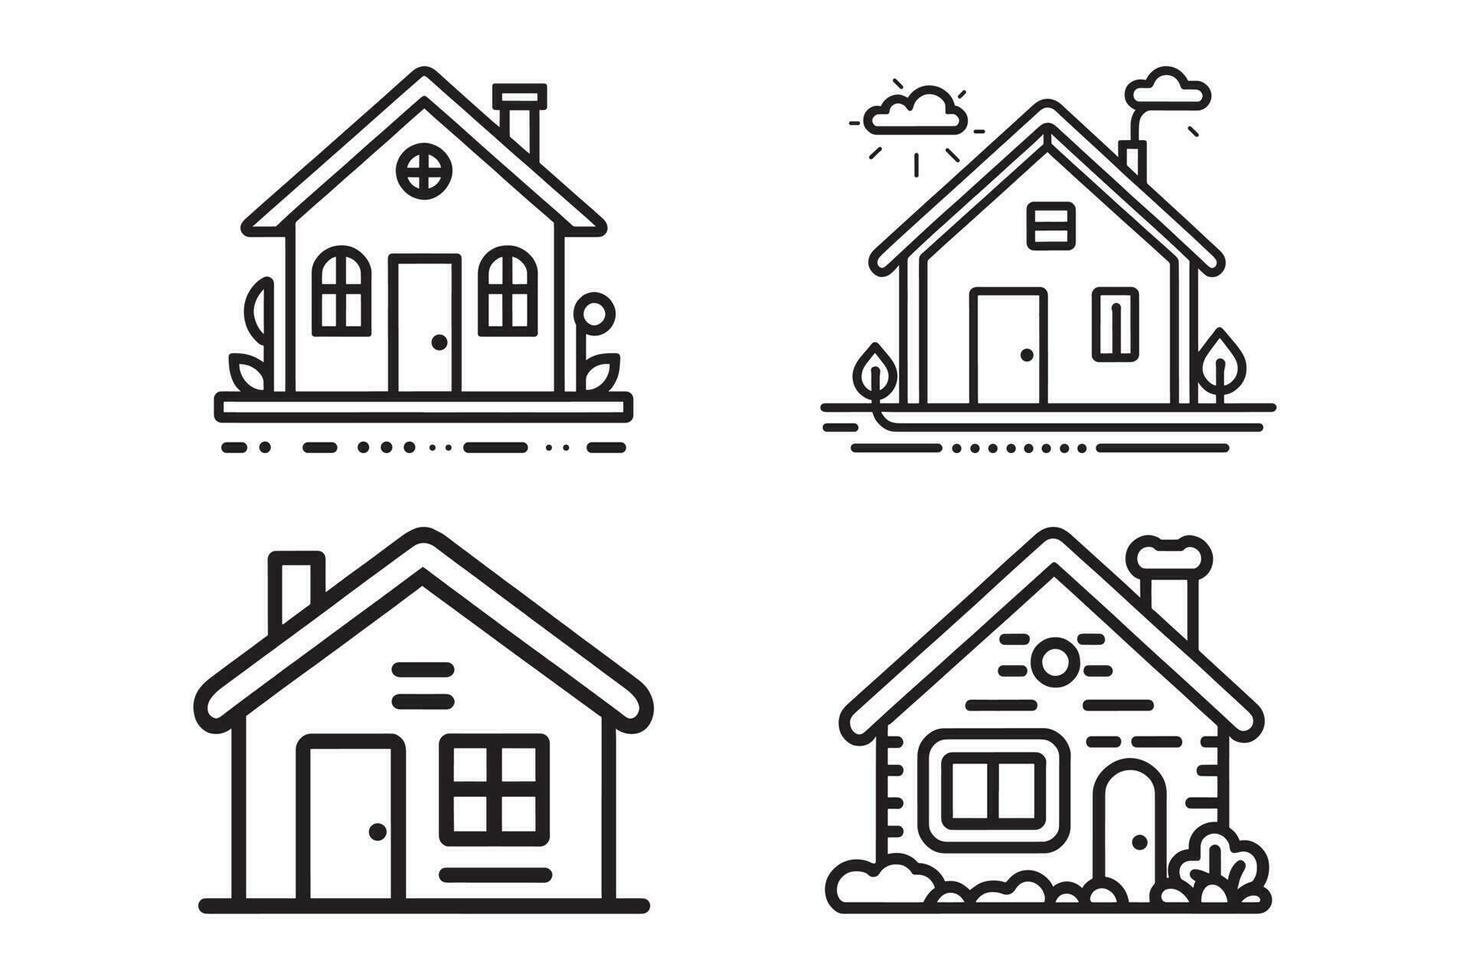 Home Icon set, Illustration of house icons, Black and white house icon, Outline Style, Home line art icons, clean simple design vector